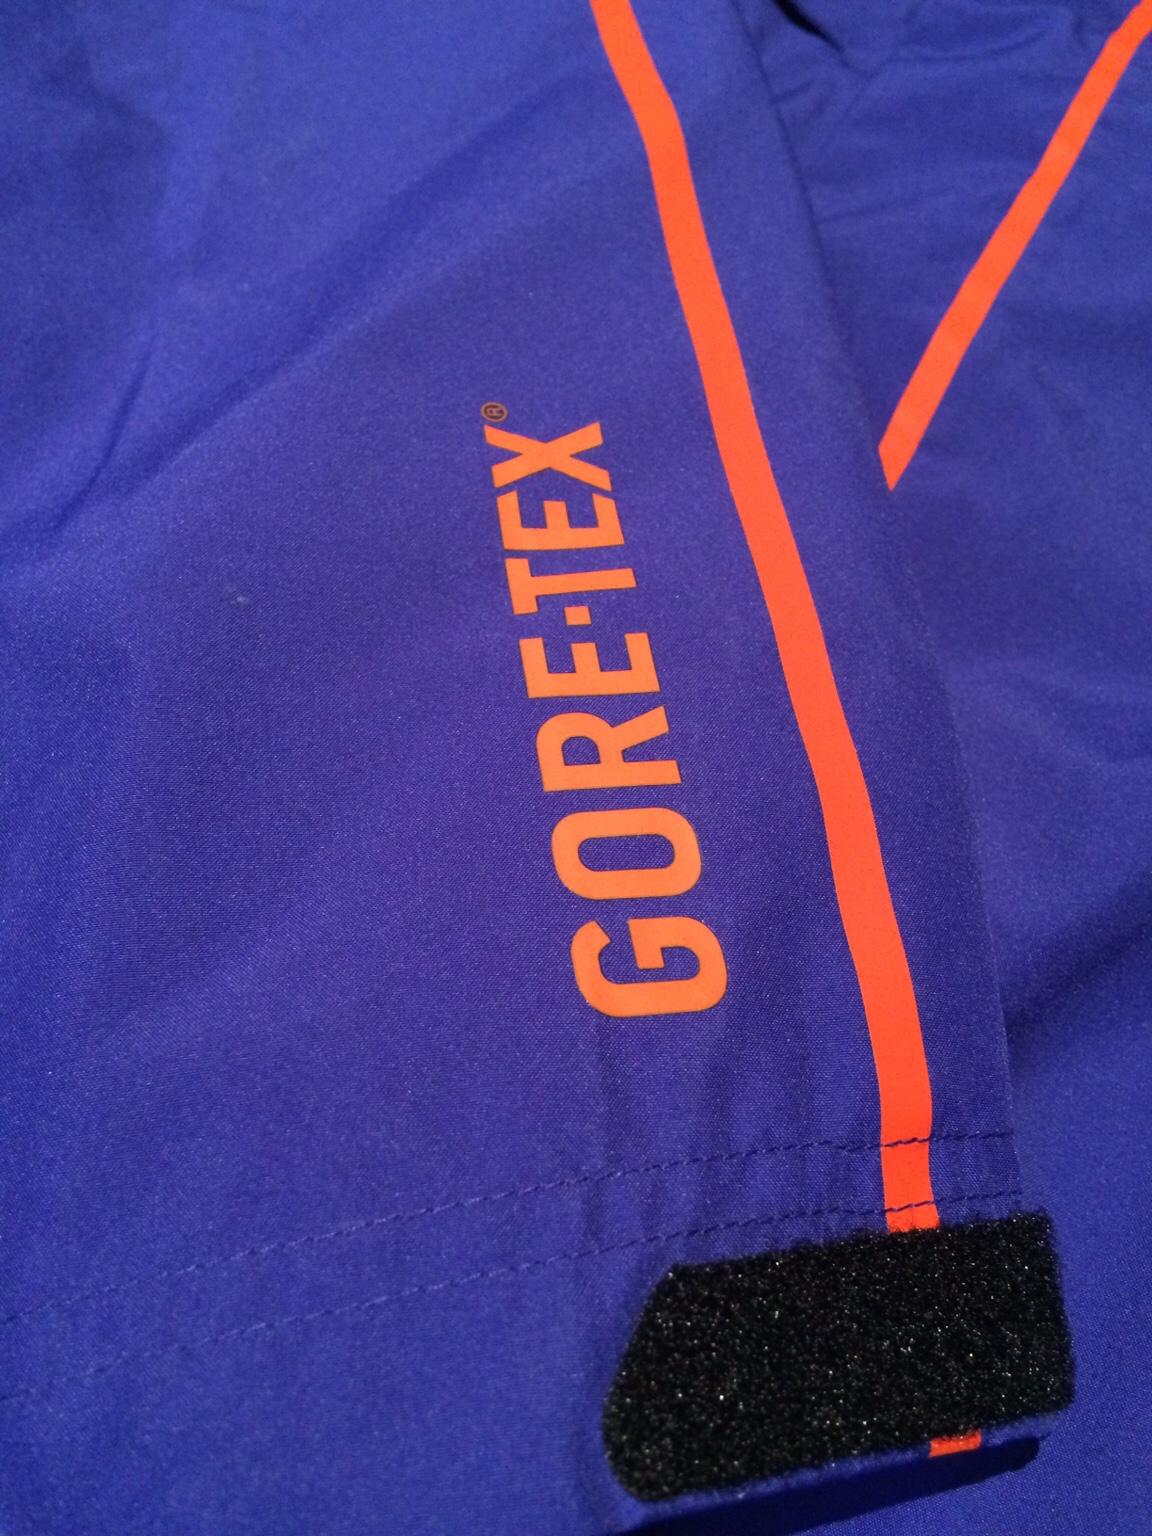 Golf Adidas Gore Tex Waterproof Jacket In Ts17 Thornaby For 80 00 For Sale Shpock